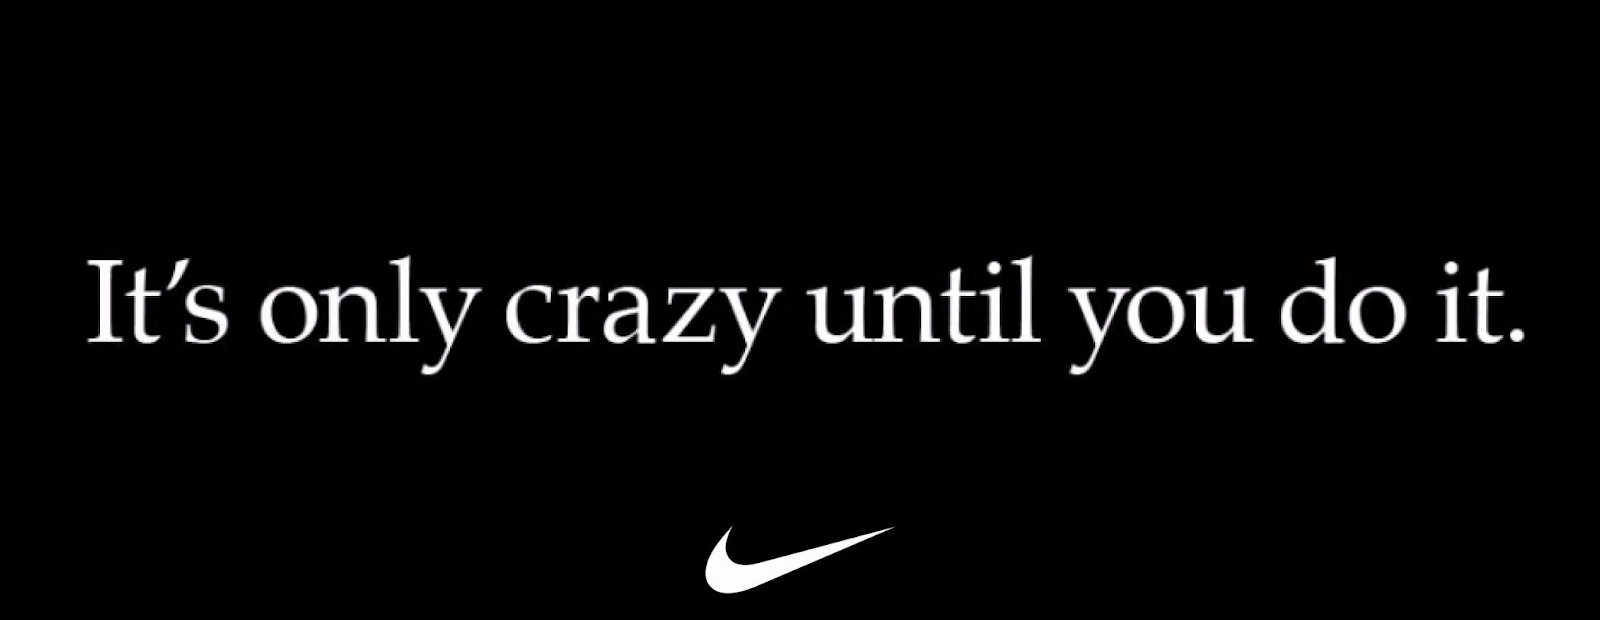 "It's only crazy until you do it" slogan from Nike's “Dream Crazier” campaign